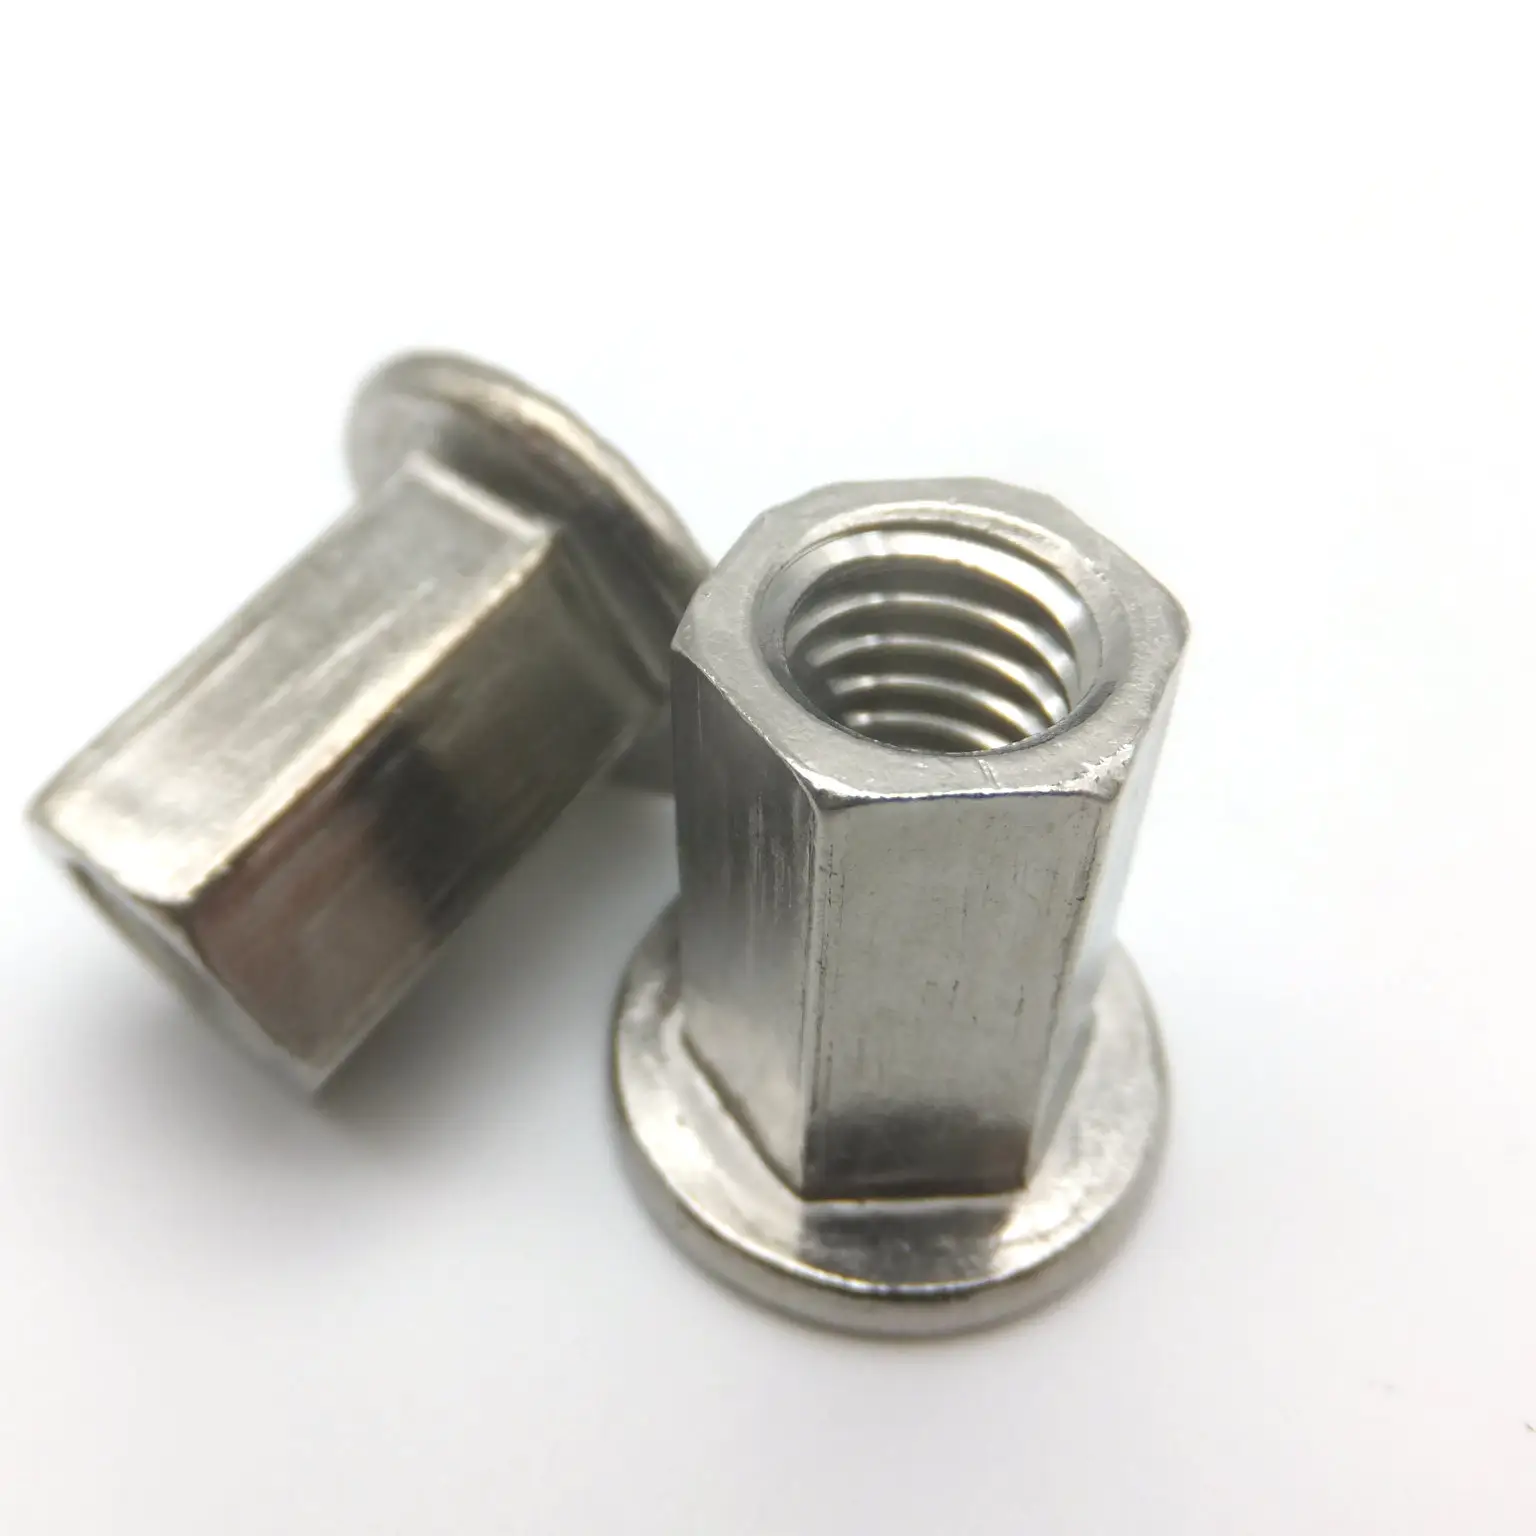 Hardware Material High Strength Ansi Low Carbon Steel Flat Head M7 M3 Stainless Flange Nut M30